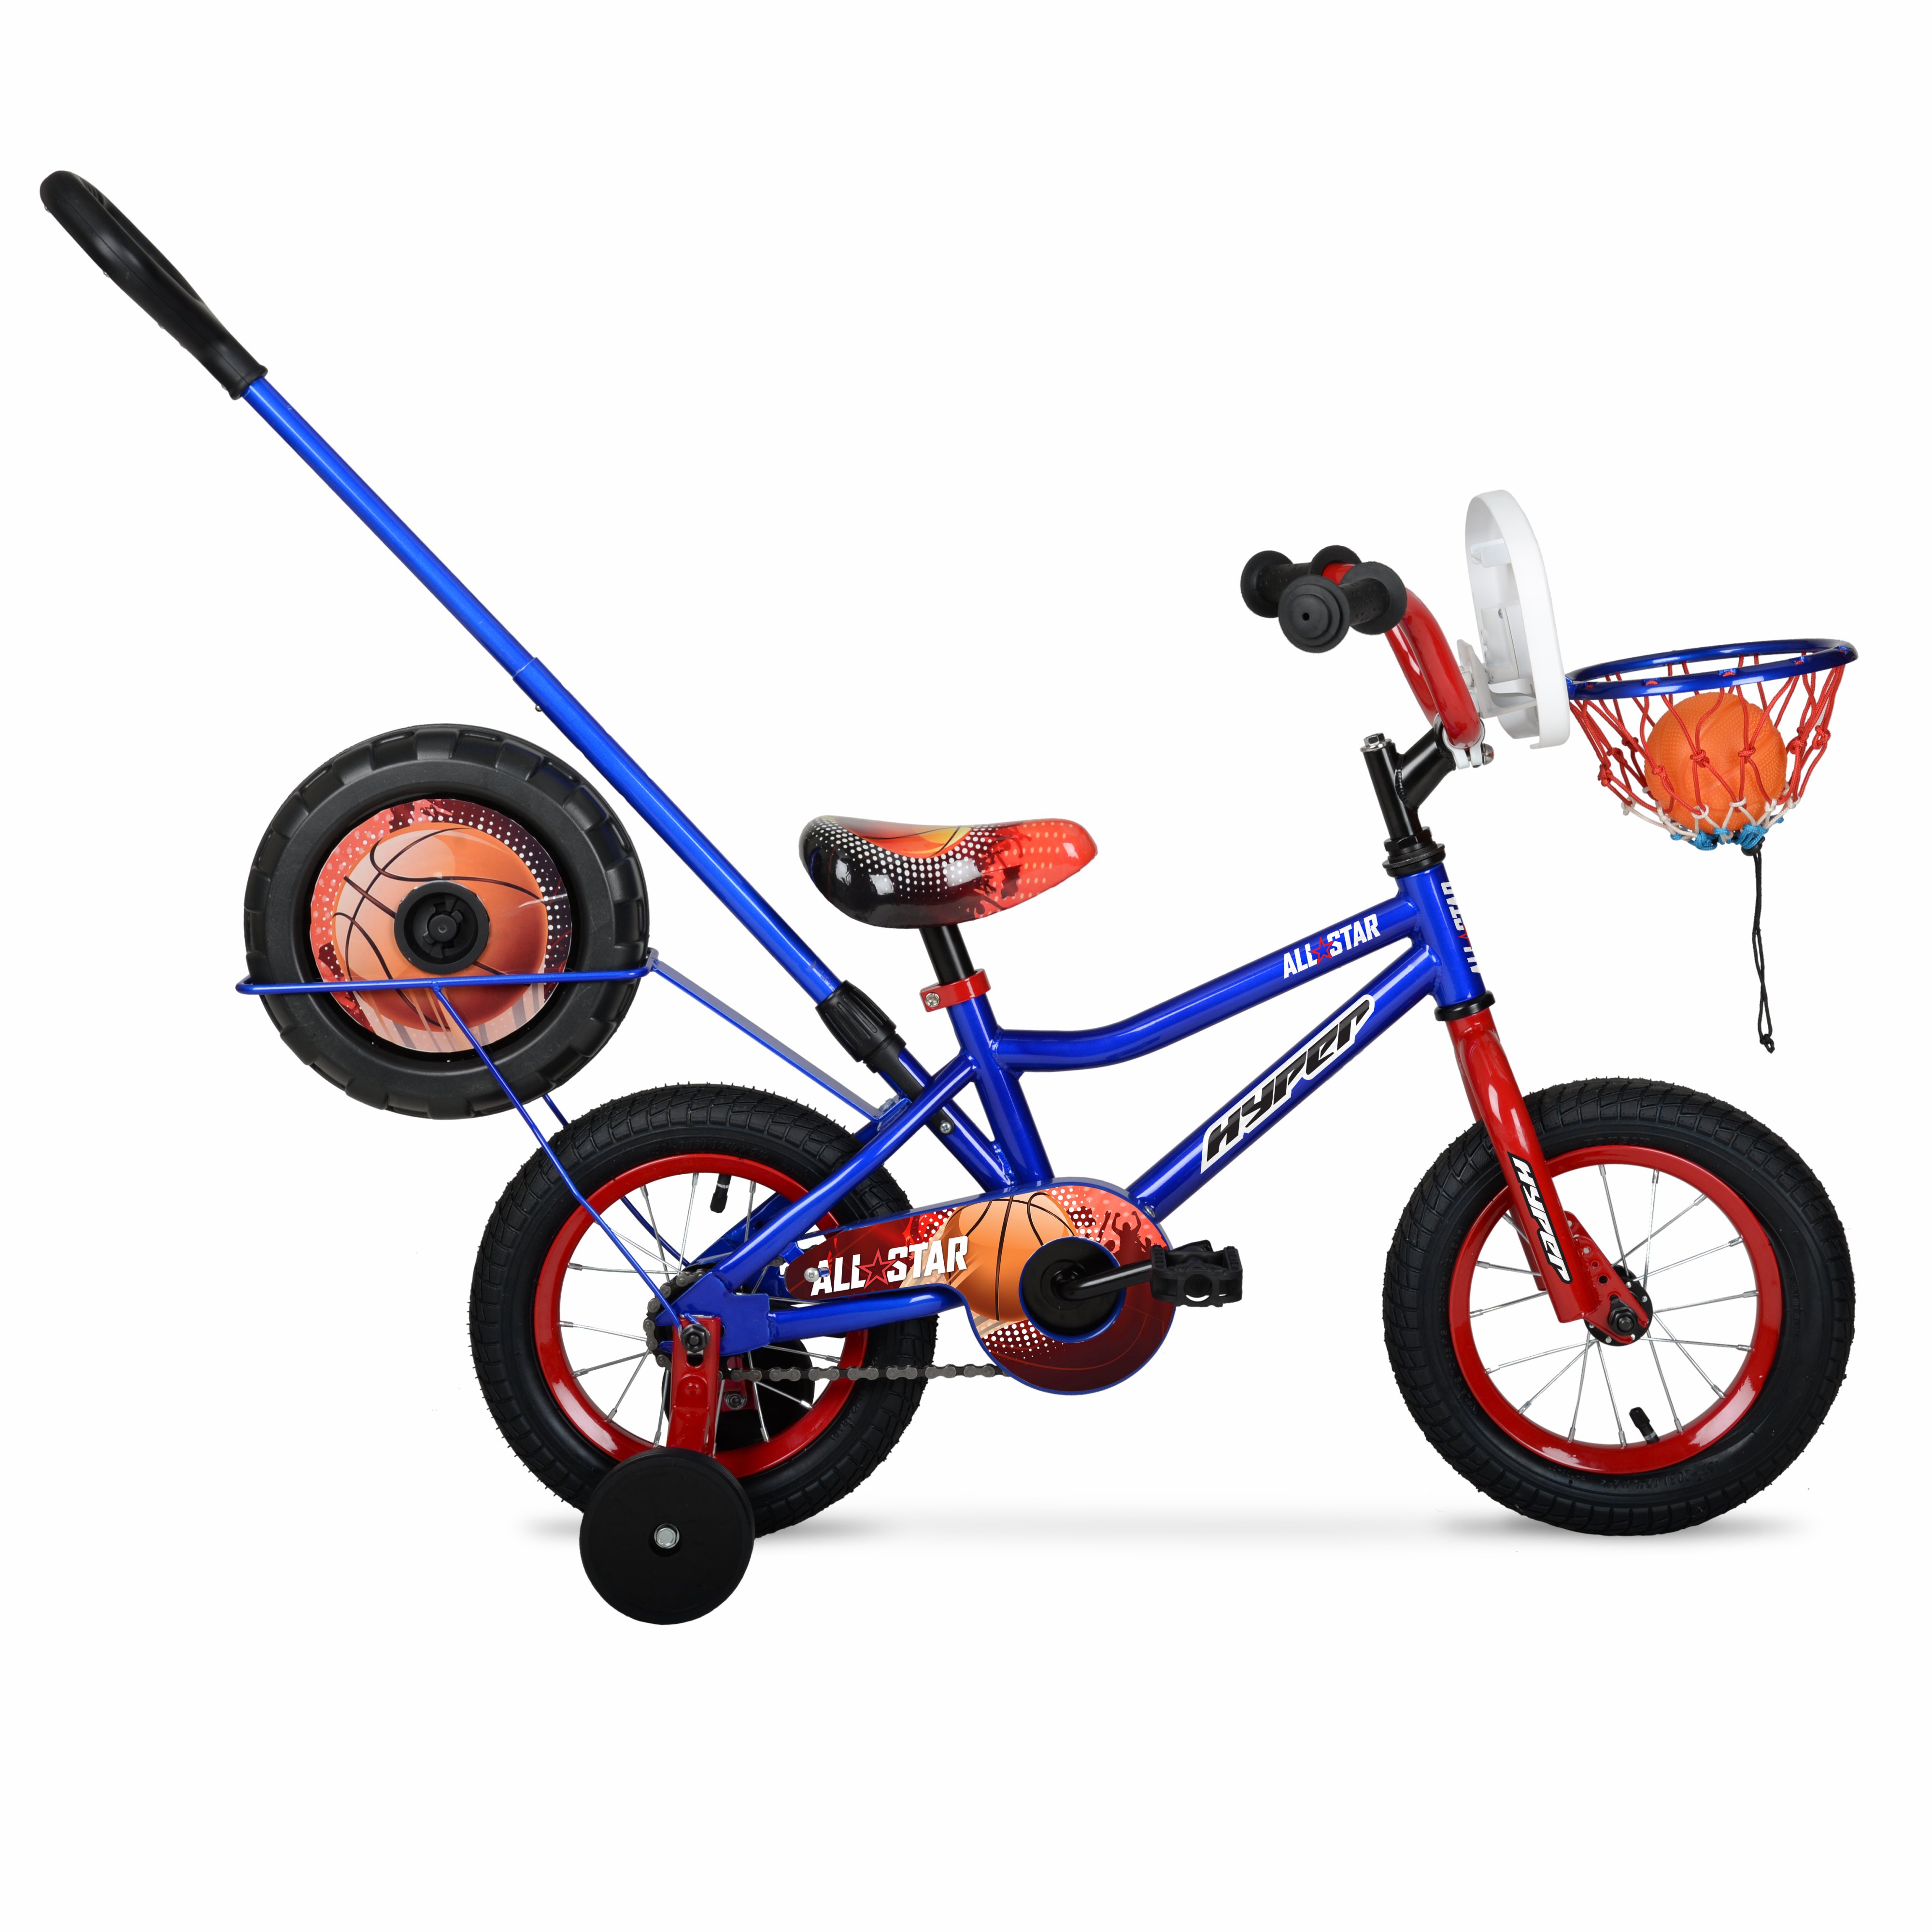 Hyper Bicycles 12" All Star Basketball Bike, with Training Wheels, for Kids Ages 3-5 Years, Basketball Hoop - image 3 of 3